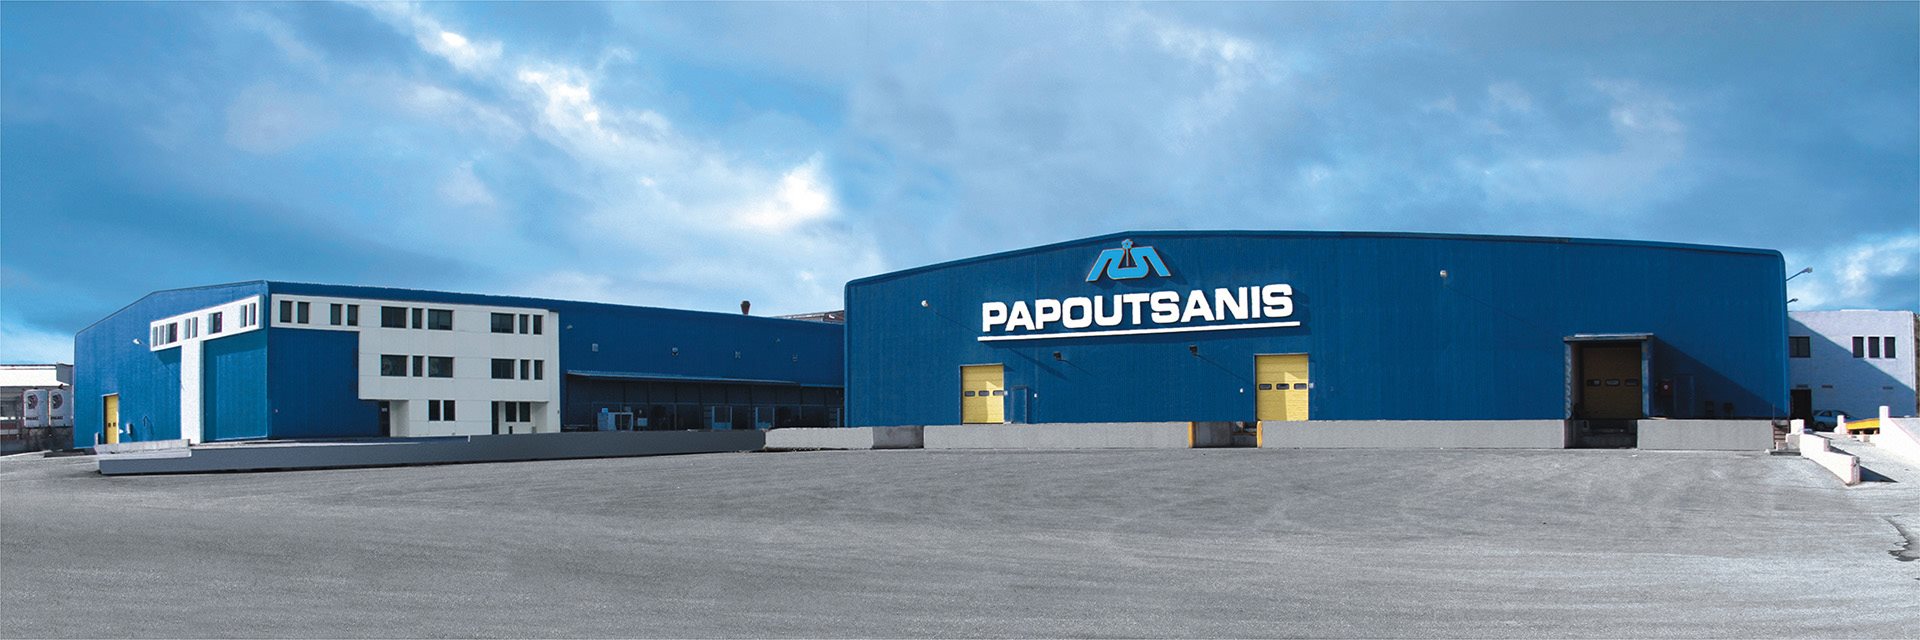 Papoutsanis – Increase in revenues but also concerns about raw materials